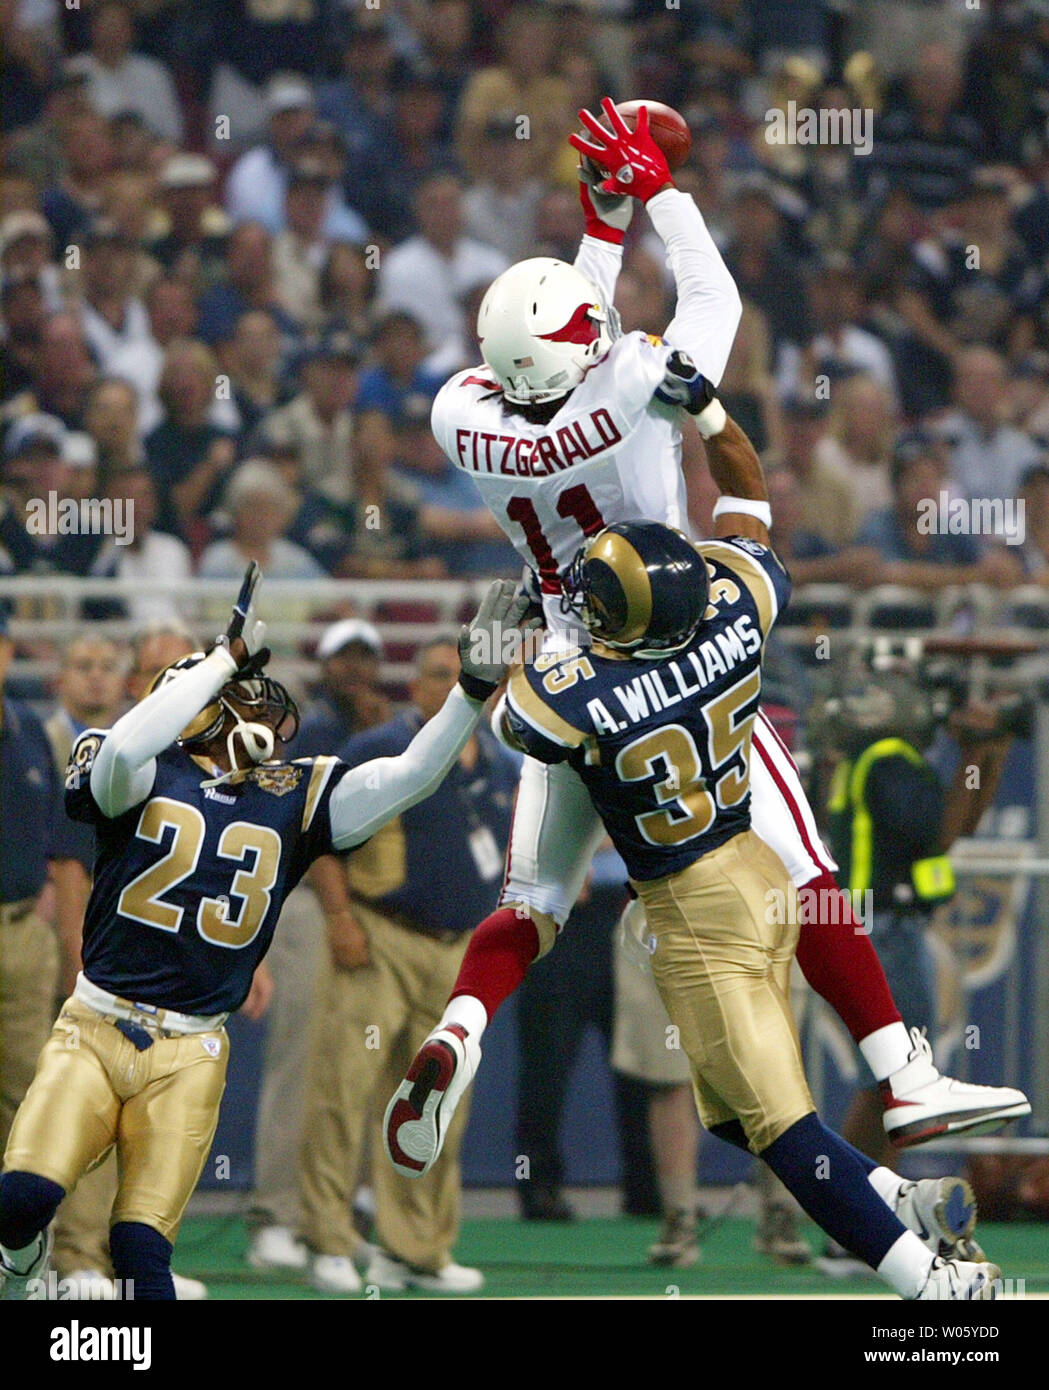 Arizona Cardinals Larry Fitzgerald jumps to catch the football for a 37-yard gain in front of St. Louis Rams Aeneas Williams (35) and Jerametius Butler (23)  for the first play of the game at the Edward Jones Dome in St. Louis on September 12, 2004. (UPI Photo/Bill Greenblatt) Stock Photo